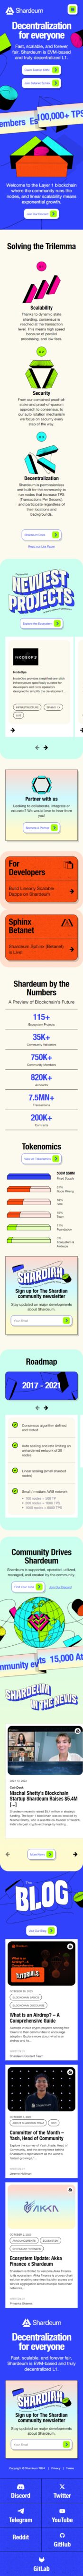 Shardeum social responsibility 404 pages